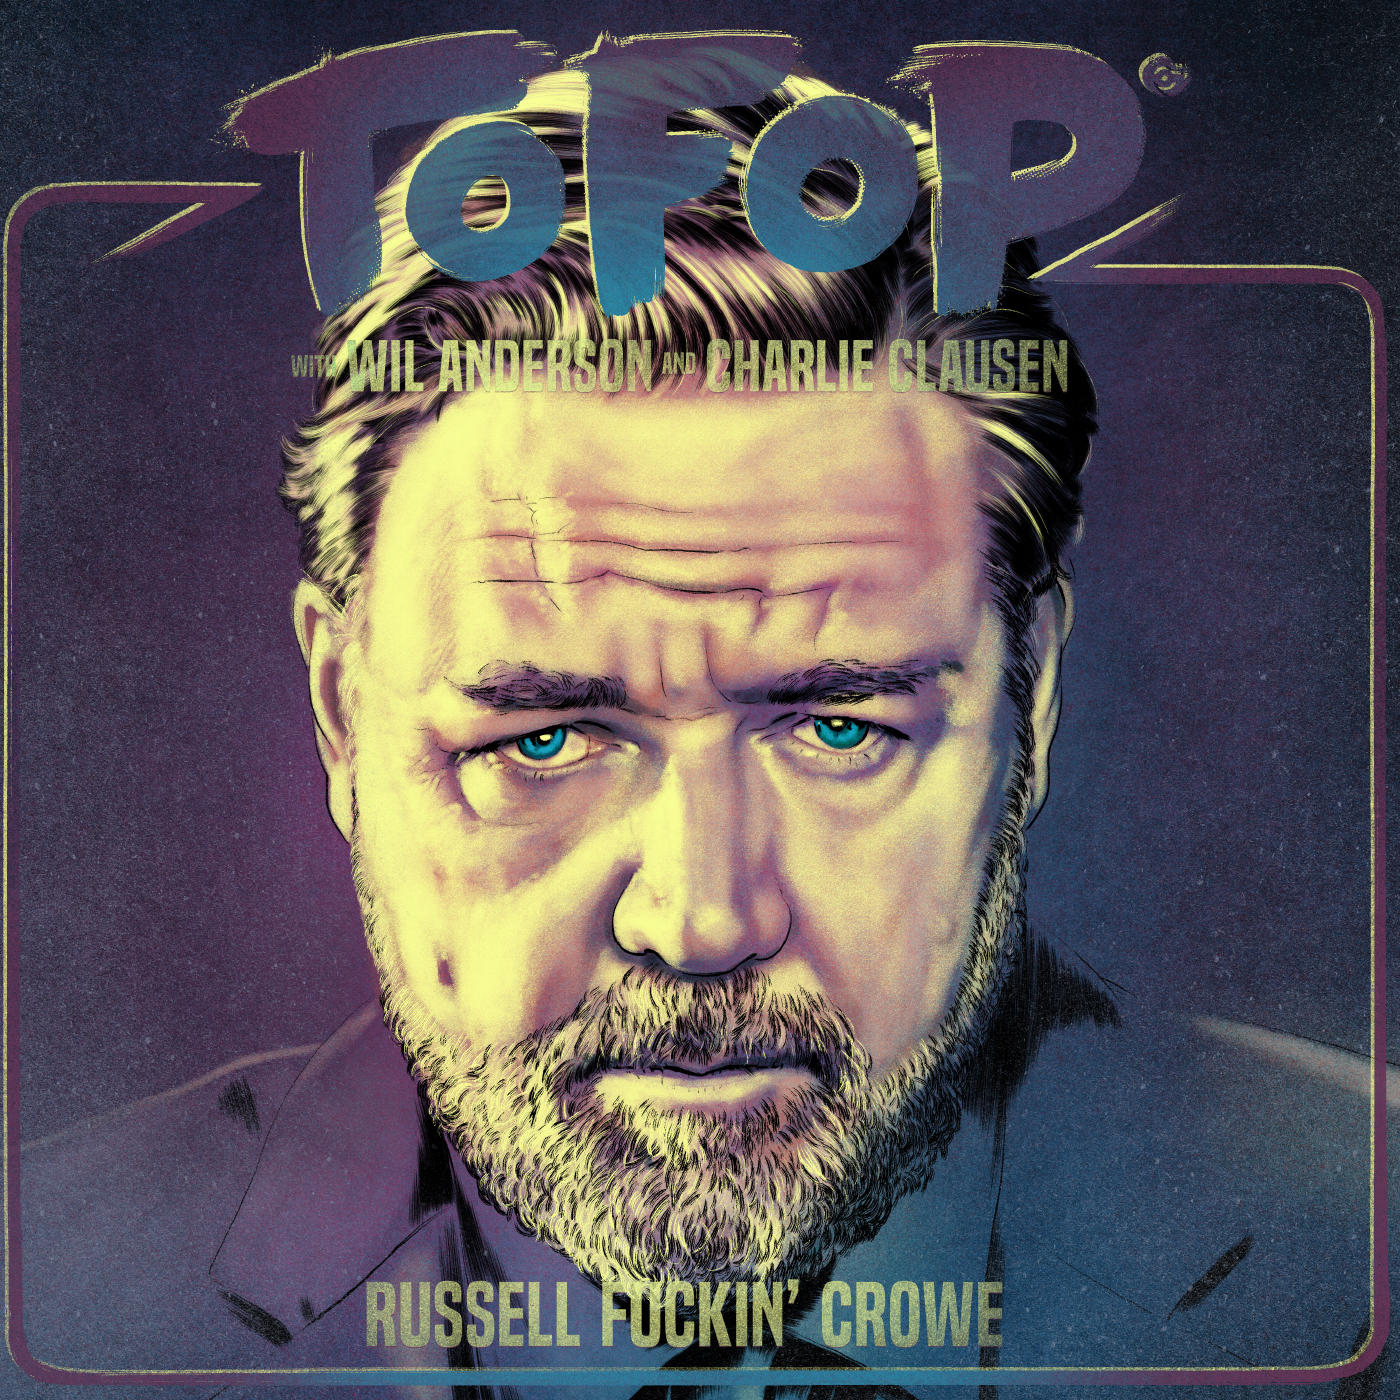 TOFOP: Russell Fuckin' Crowe